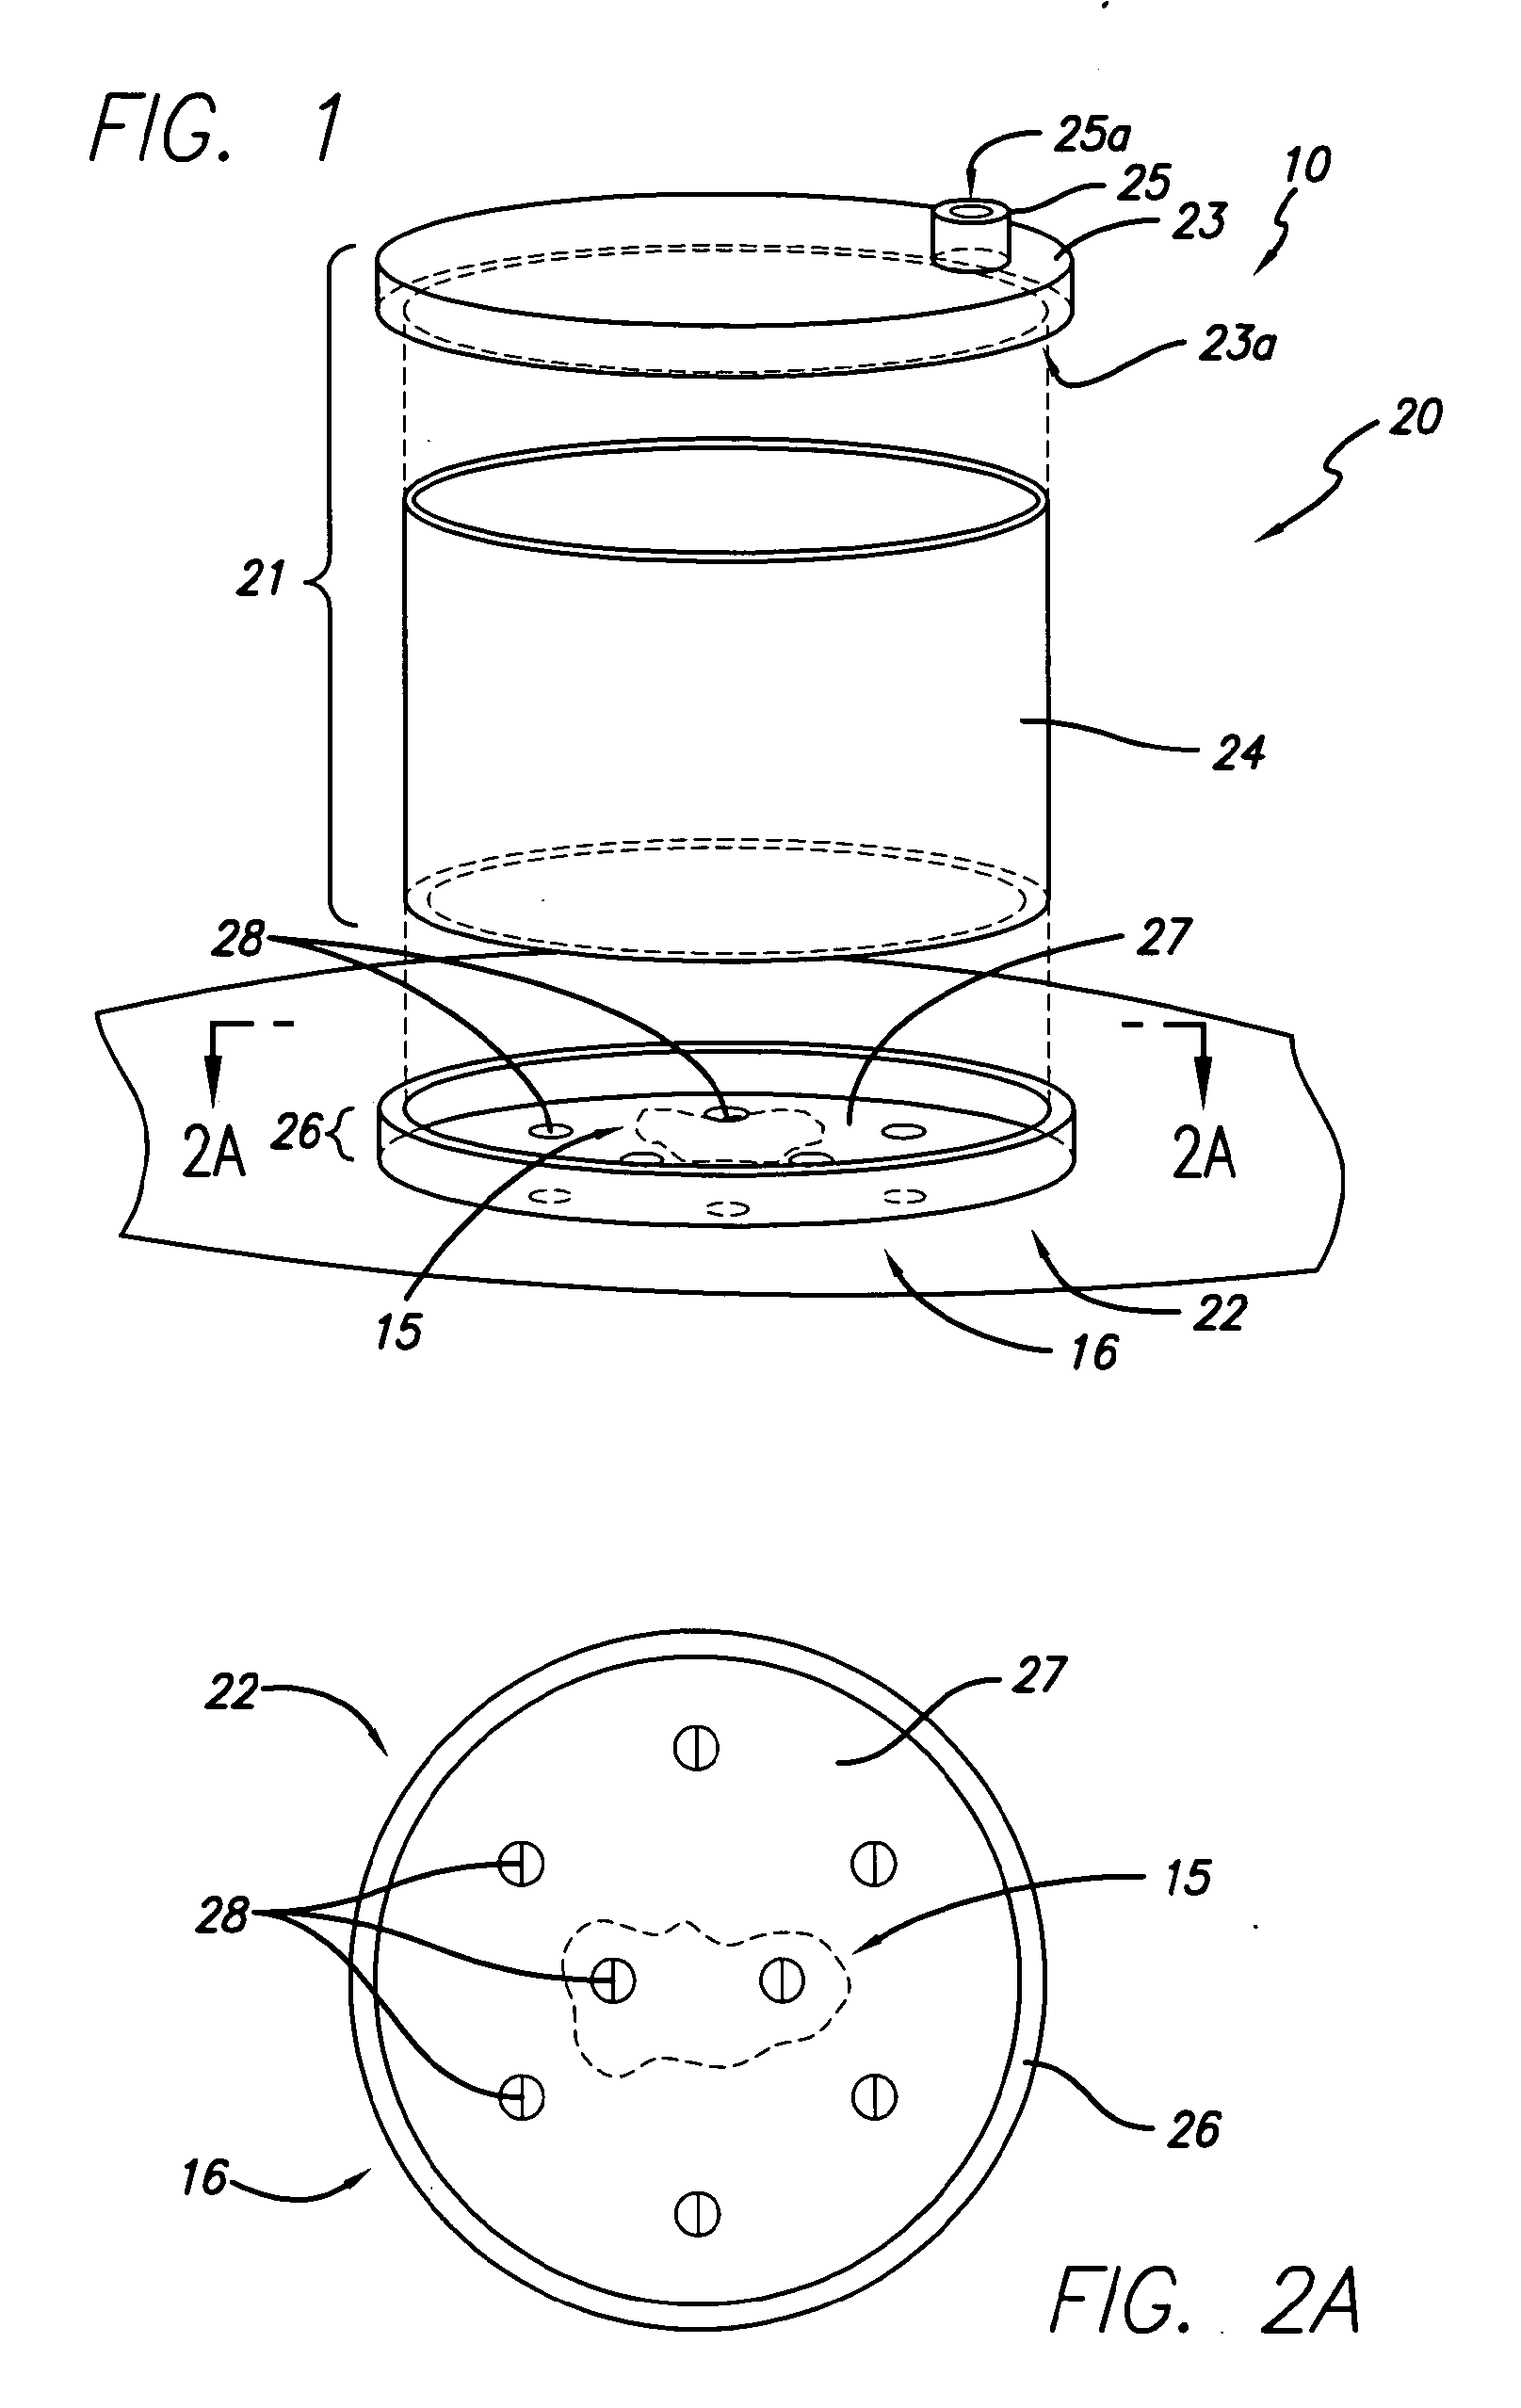 Reduced pressure wound treatment system